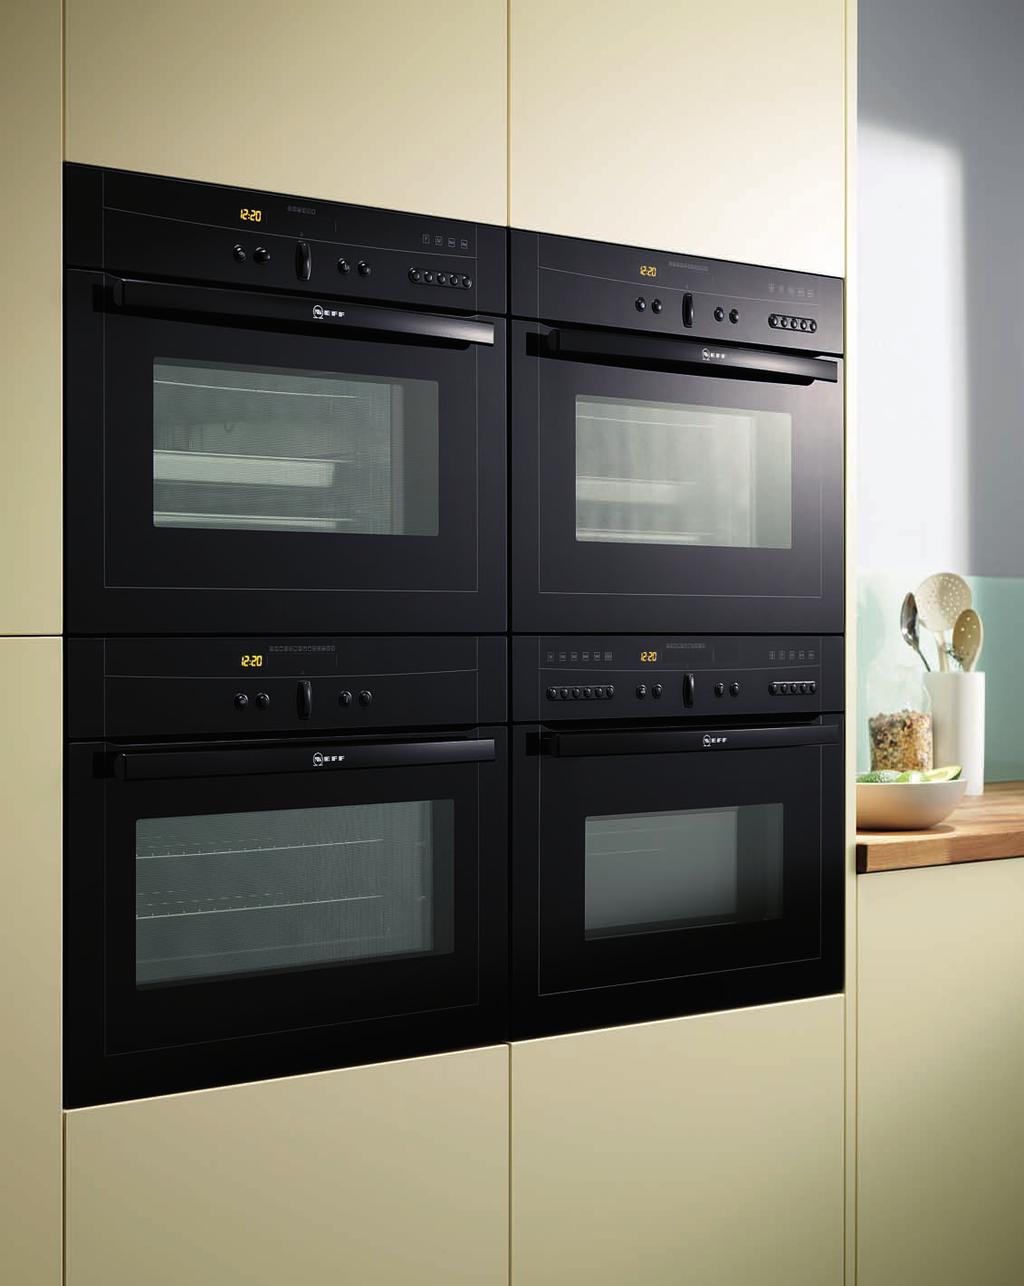 Choosing the right compact appliance Series 5 Compact oven C7E74 and Multifunction oven with microwave C67P70, Circosteam oven C47C42 and steam oven C47D42 all in black 2 Stainless steel fi nish 3